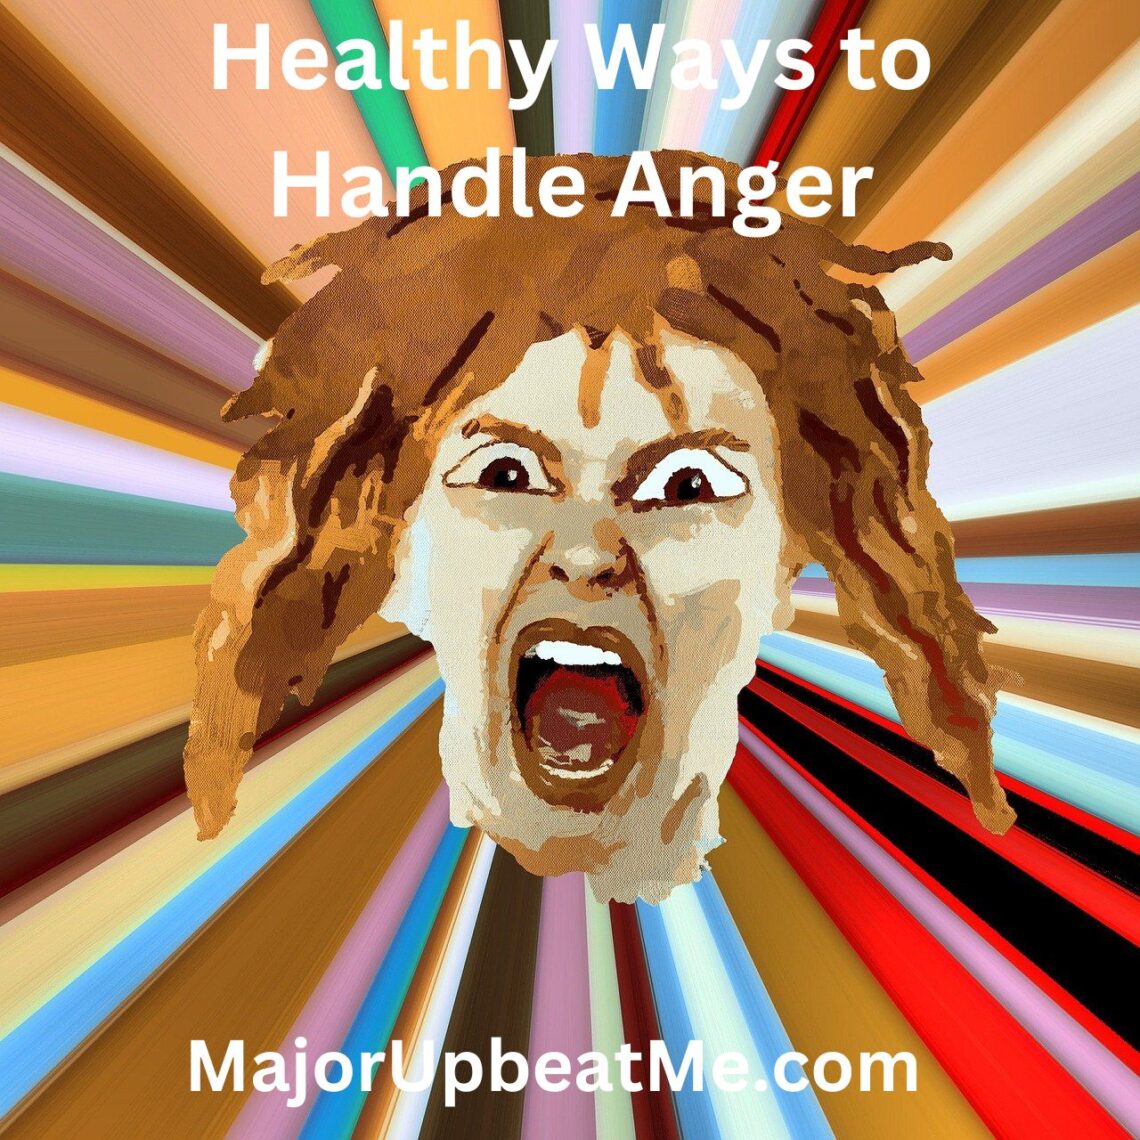 Healthy Ways to Handle Anger